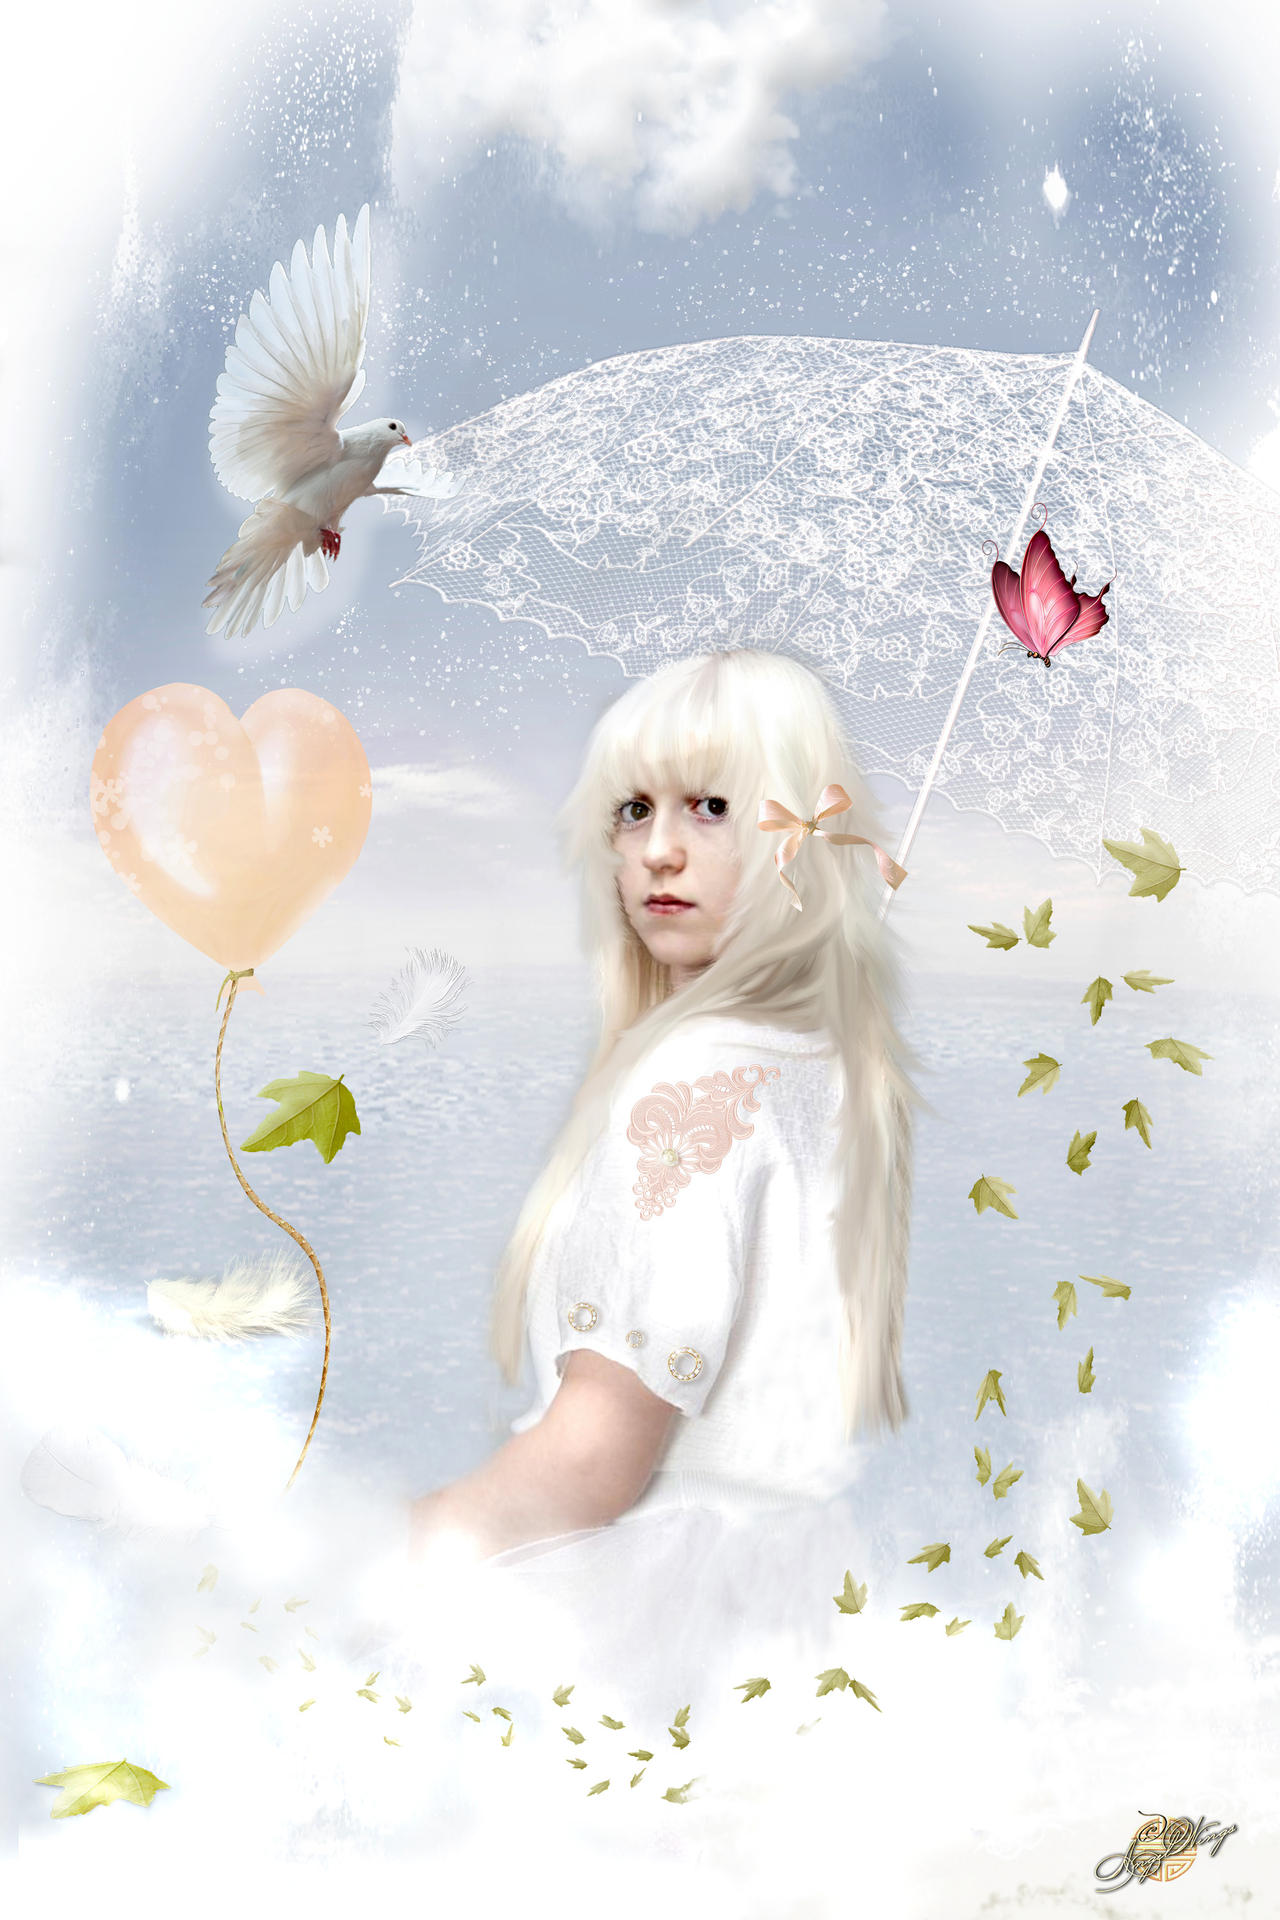 leonora by angelwingsdesign ddl0h1r AnGel-WinGs.nl